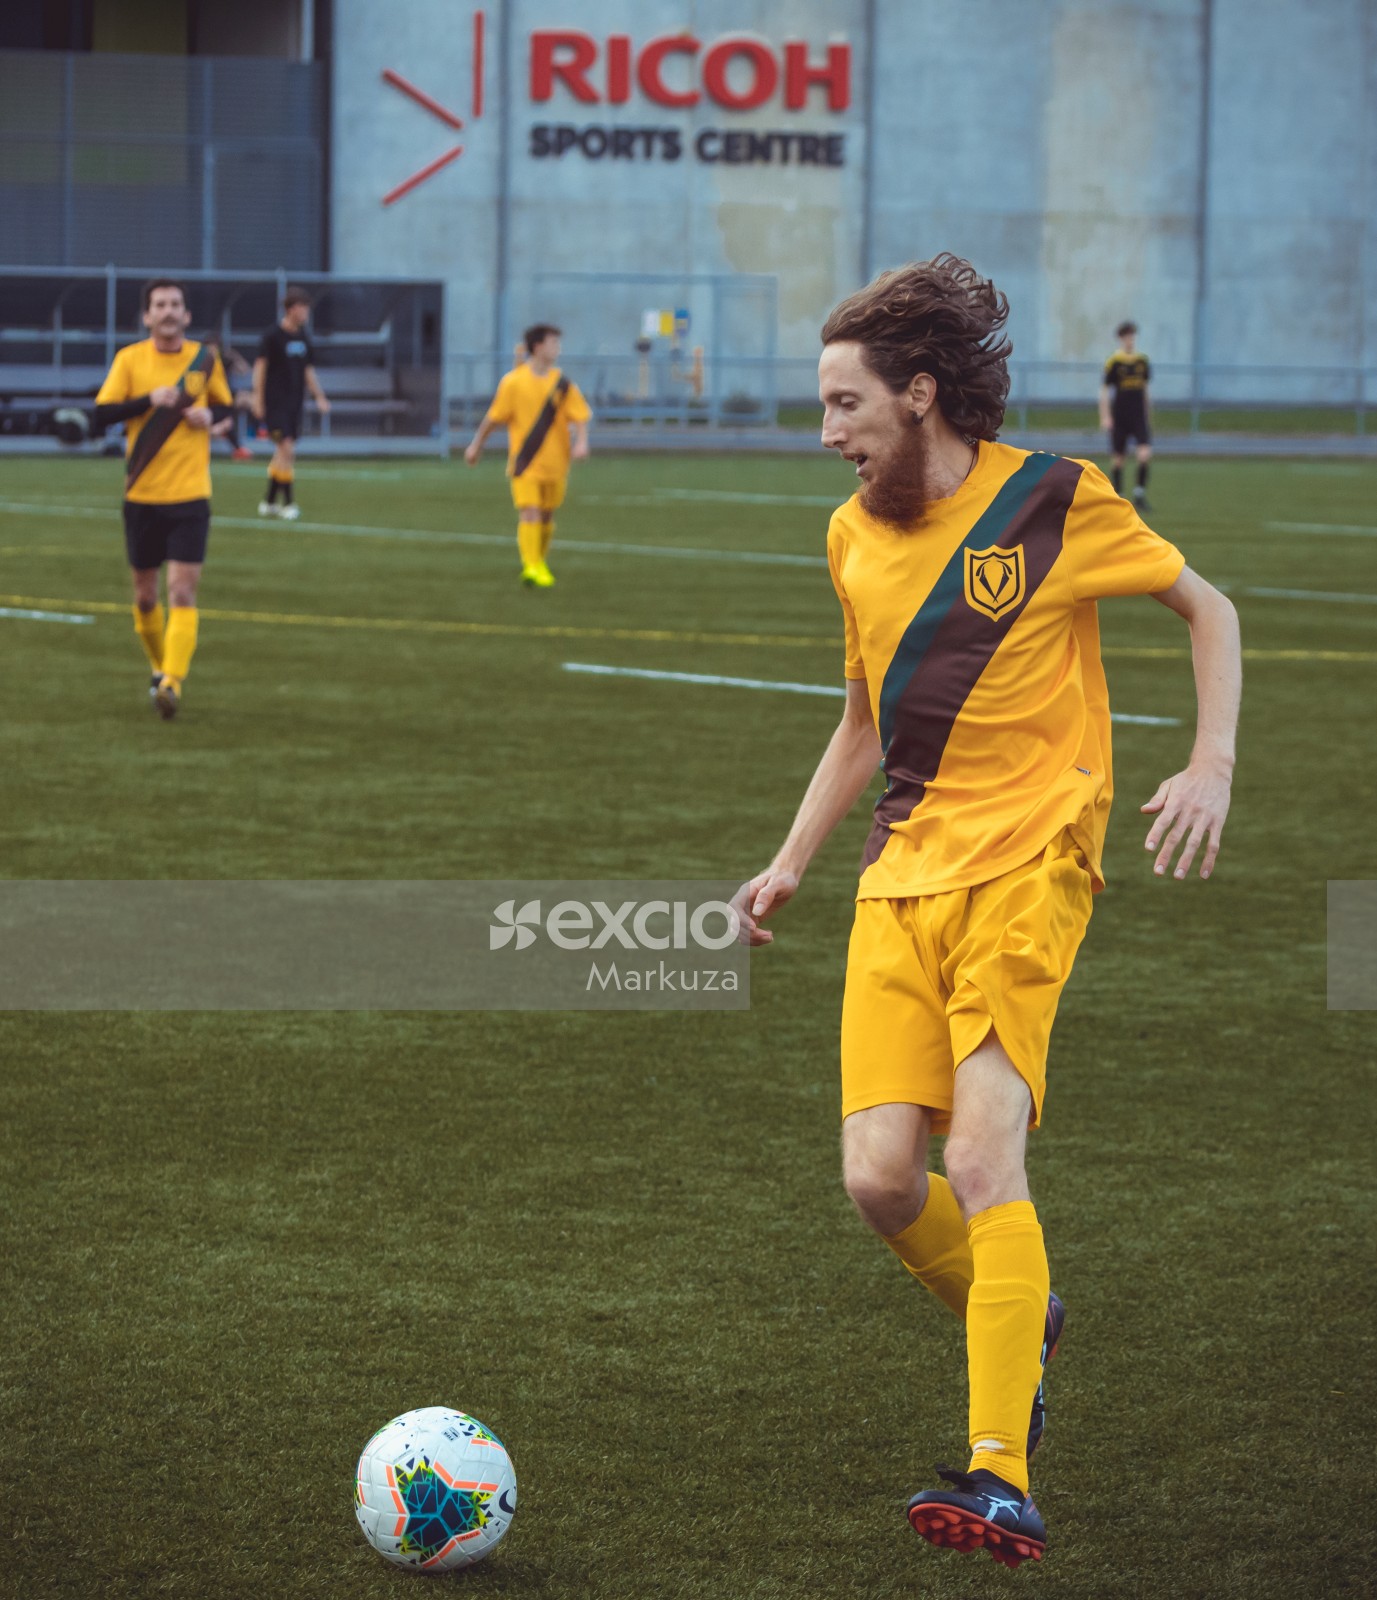 Football player with long hair and earrings - Sports Zone sunday league